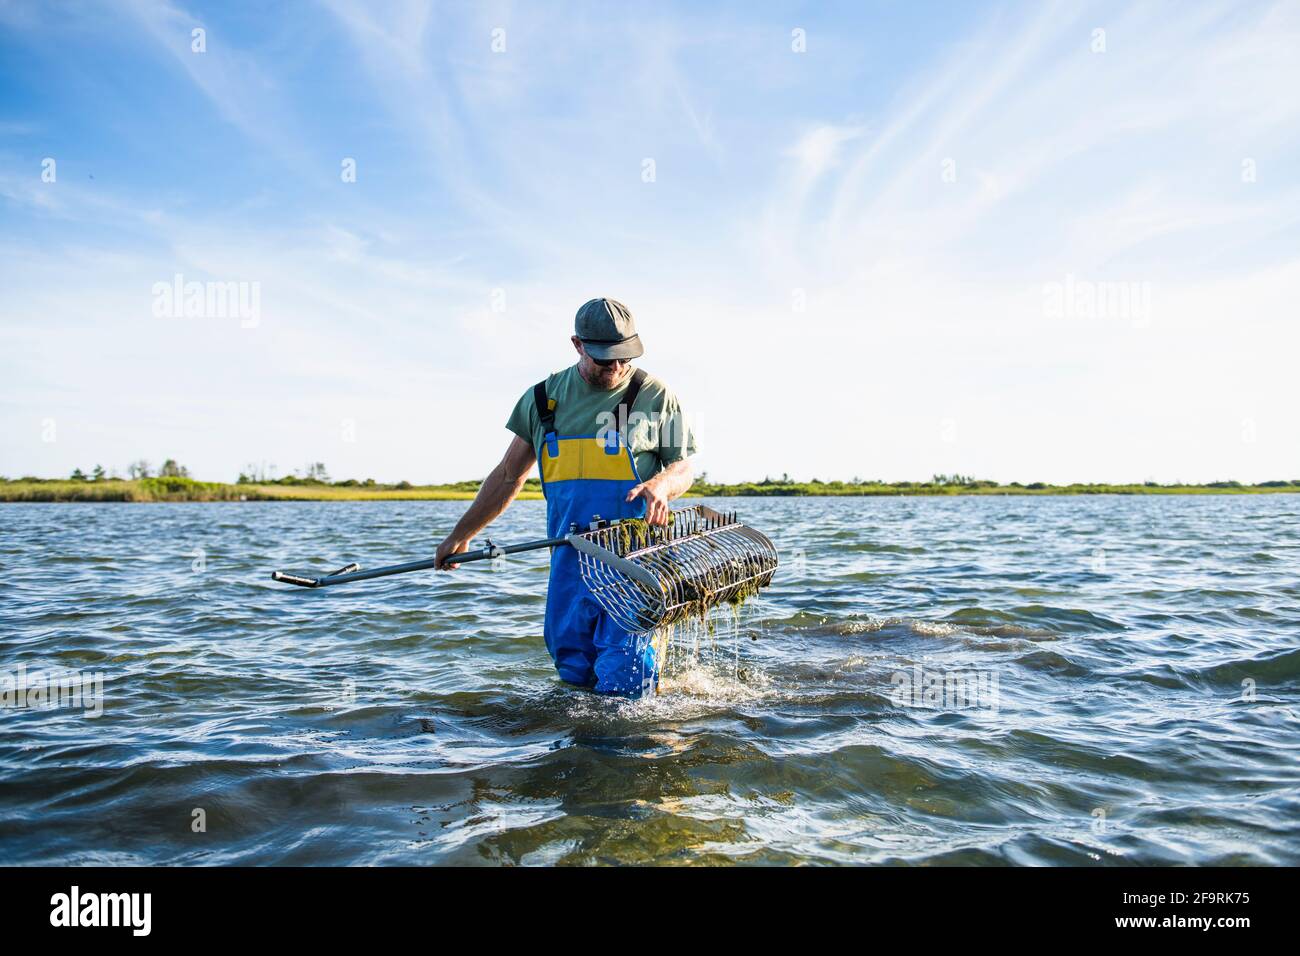 Man working on the water in aquaculture oyster farm Stock Photo